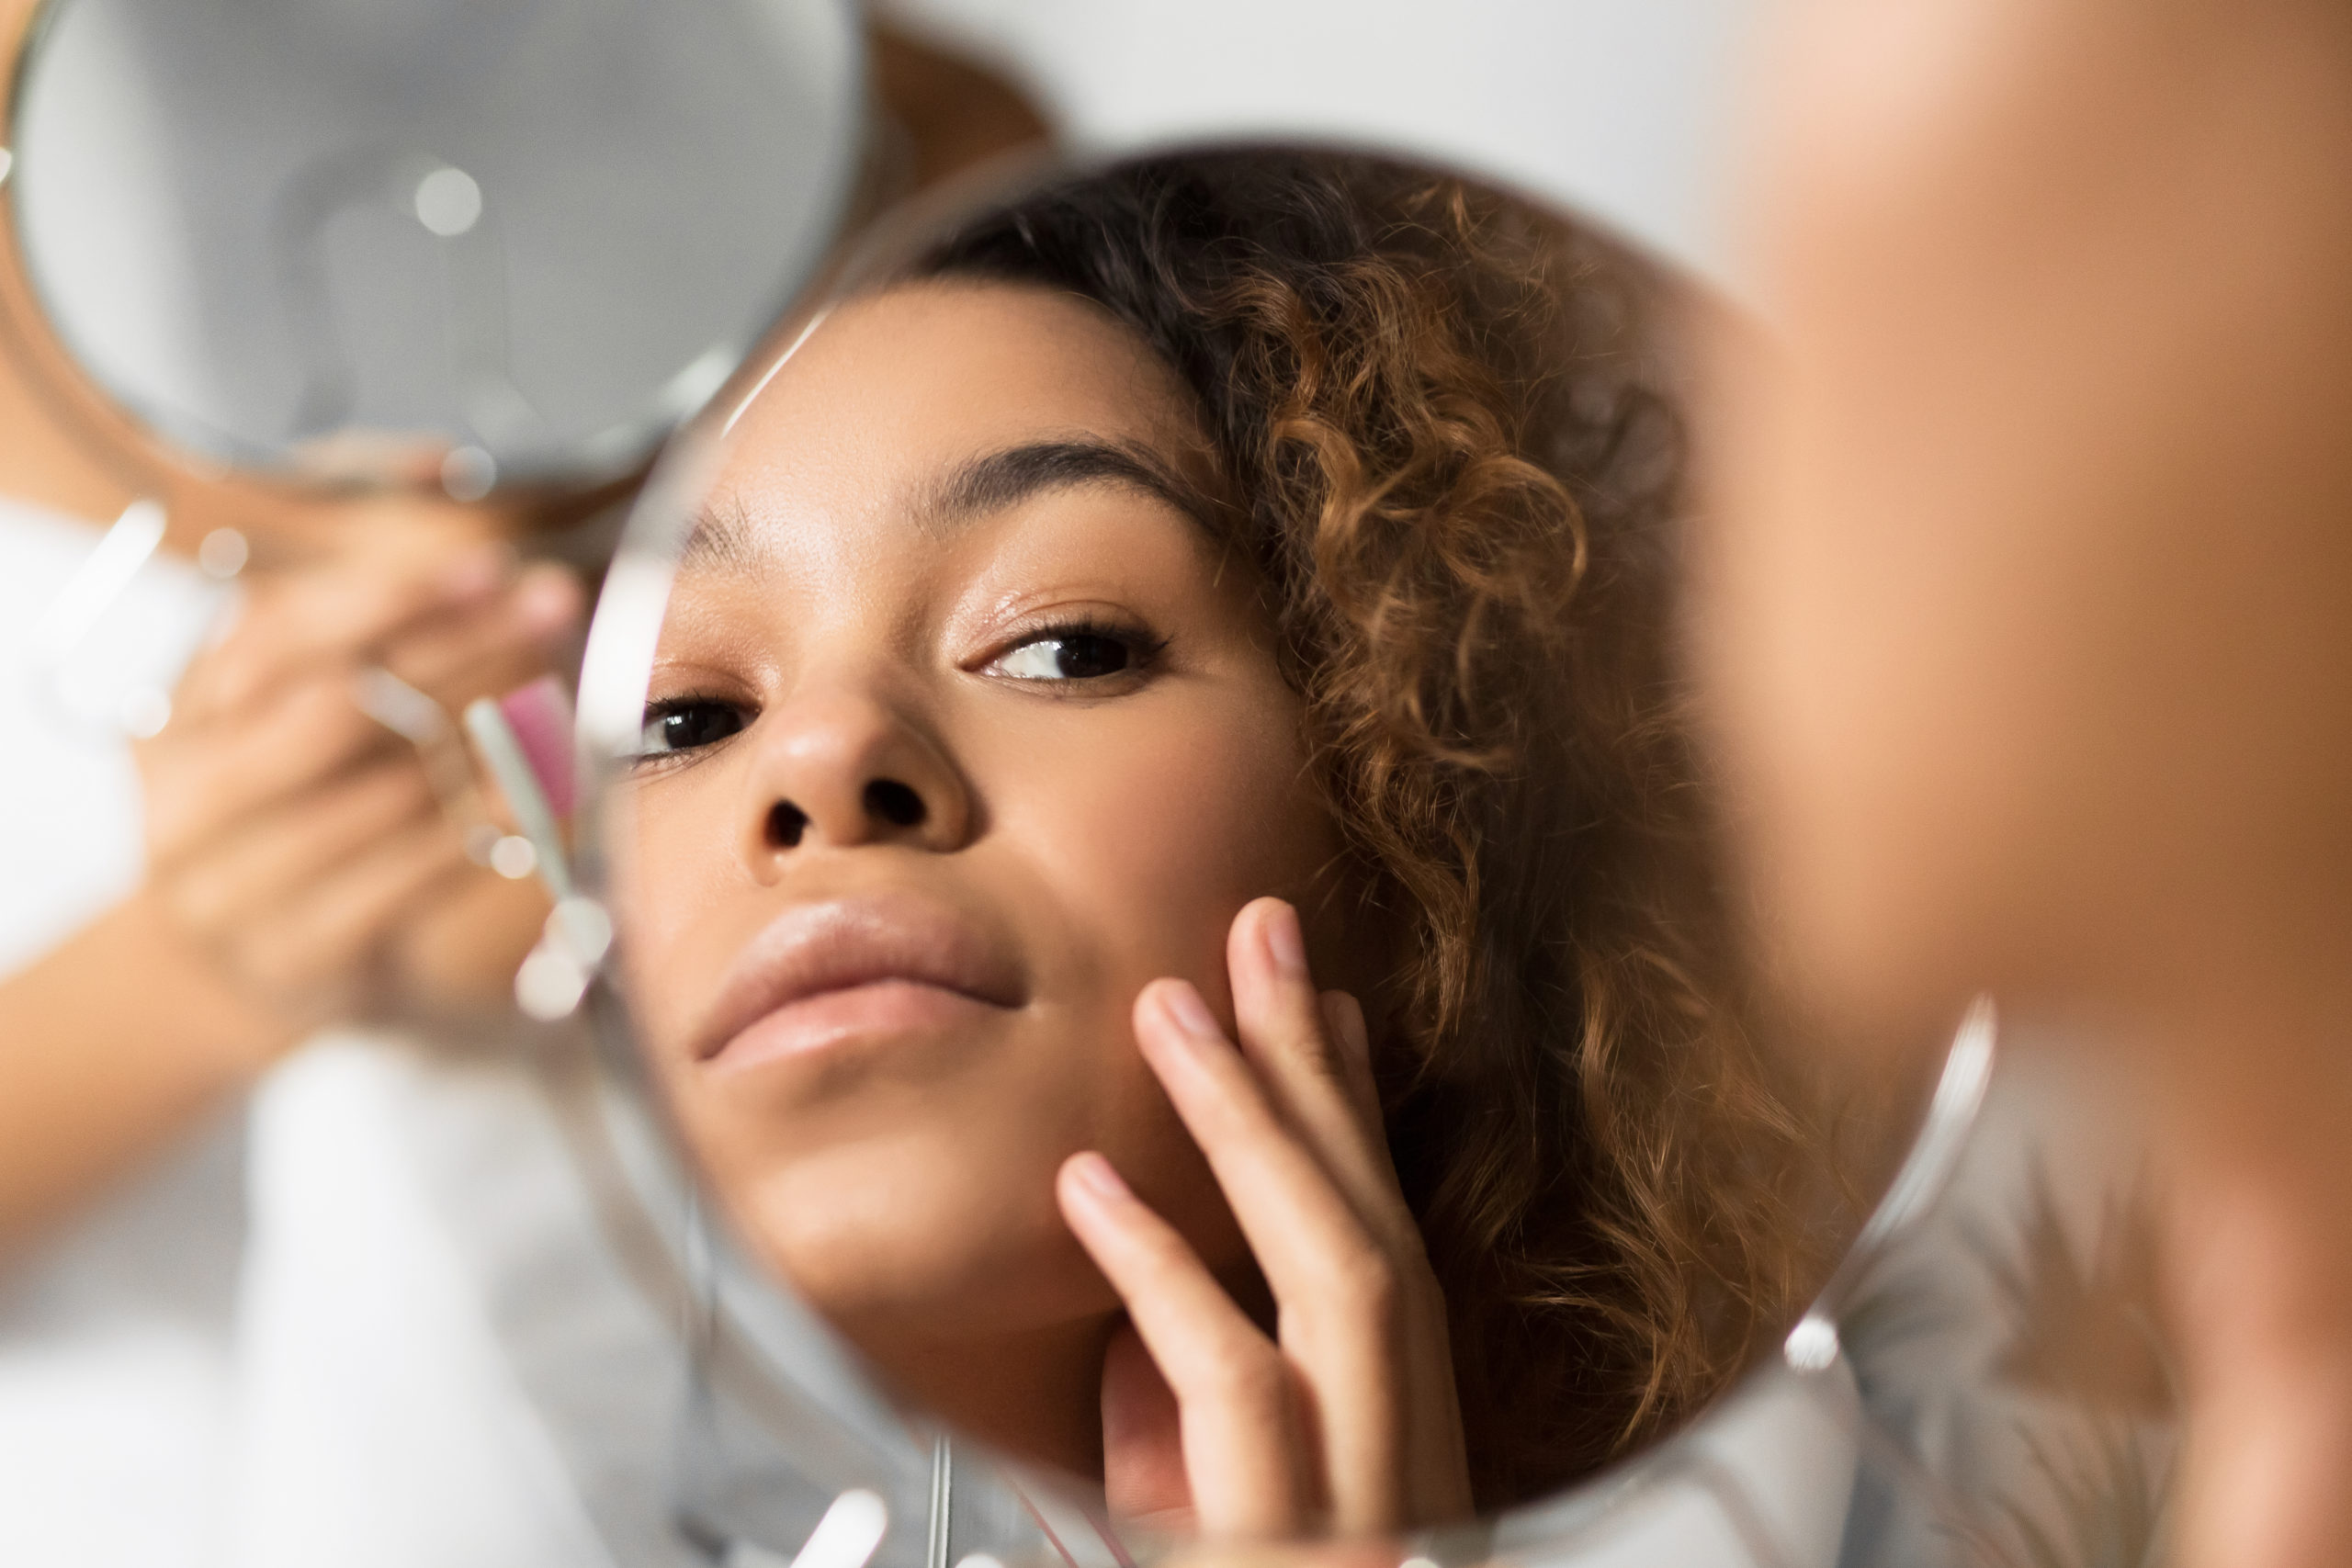 a woman examines her face in a mirror after receiving an eye bag treatment